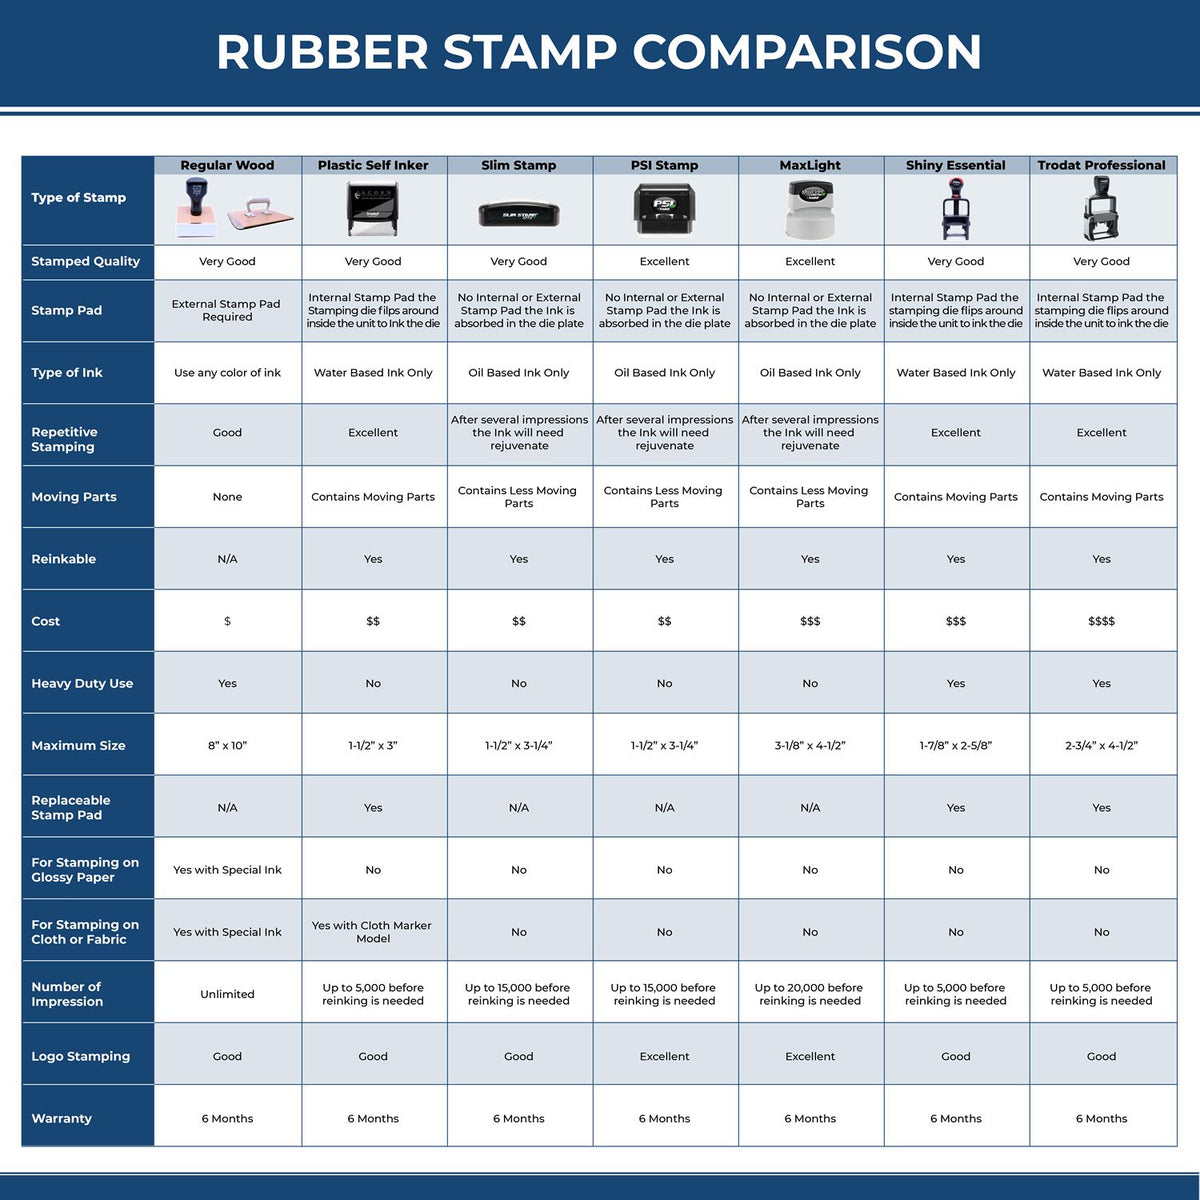 A comparison chart for the different types of mount models available for the Wooden Handle Alabama State Seal Notary Public Stamp.